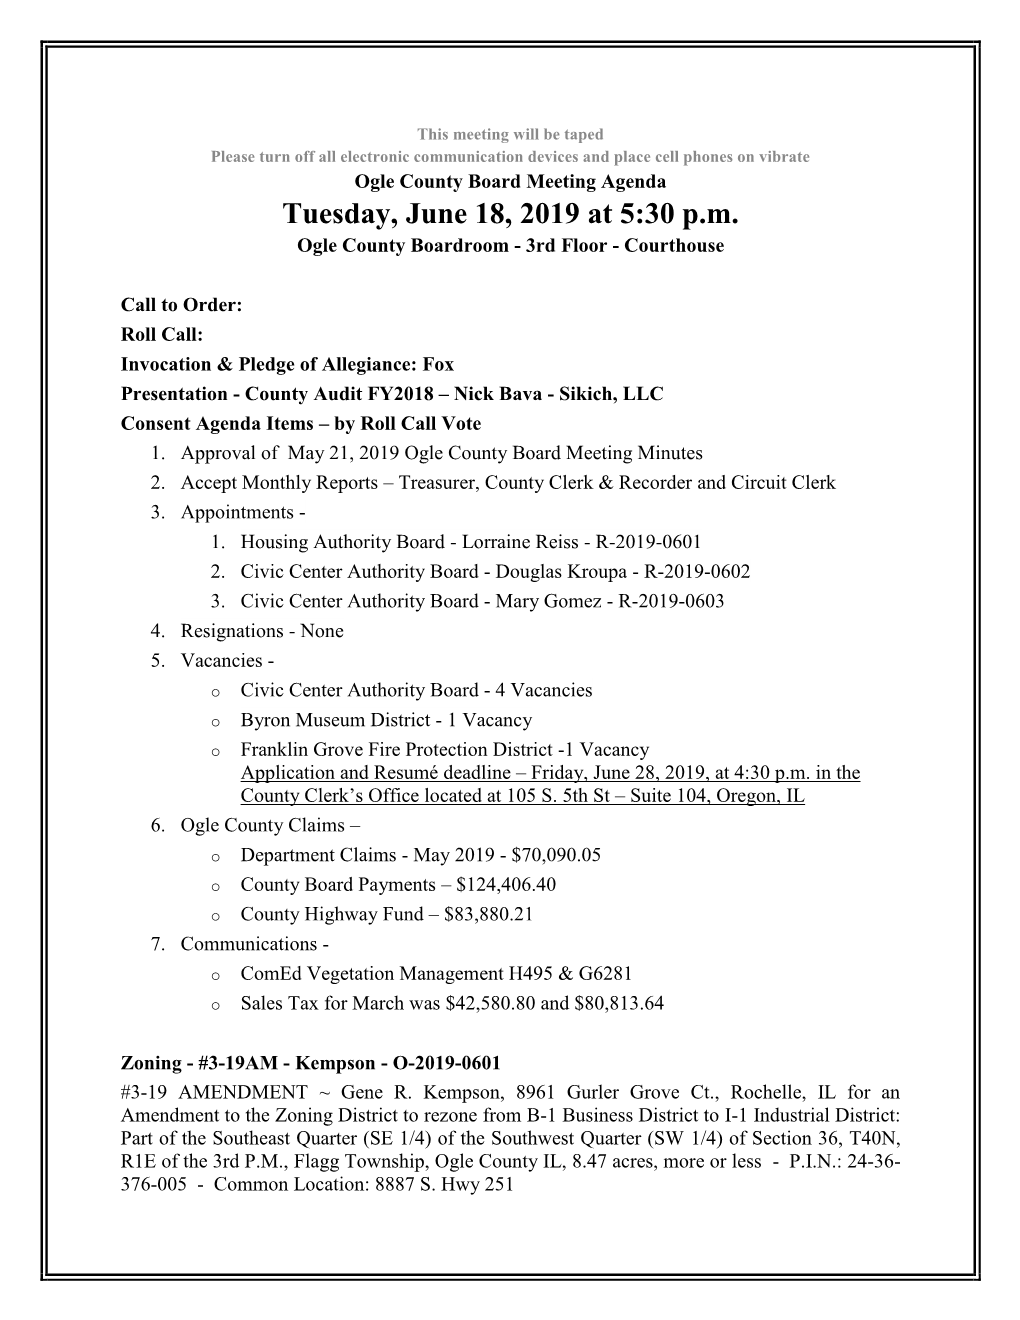 Tuesday, June 18, 2019 at 5:30 P.M. Ogle County Boardroom - 3Rd Floor - Courthouse